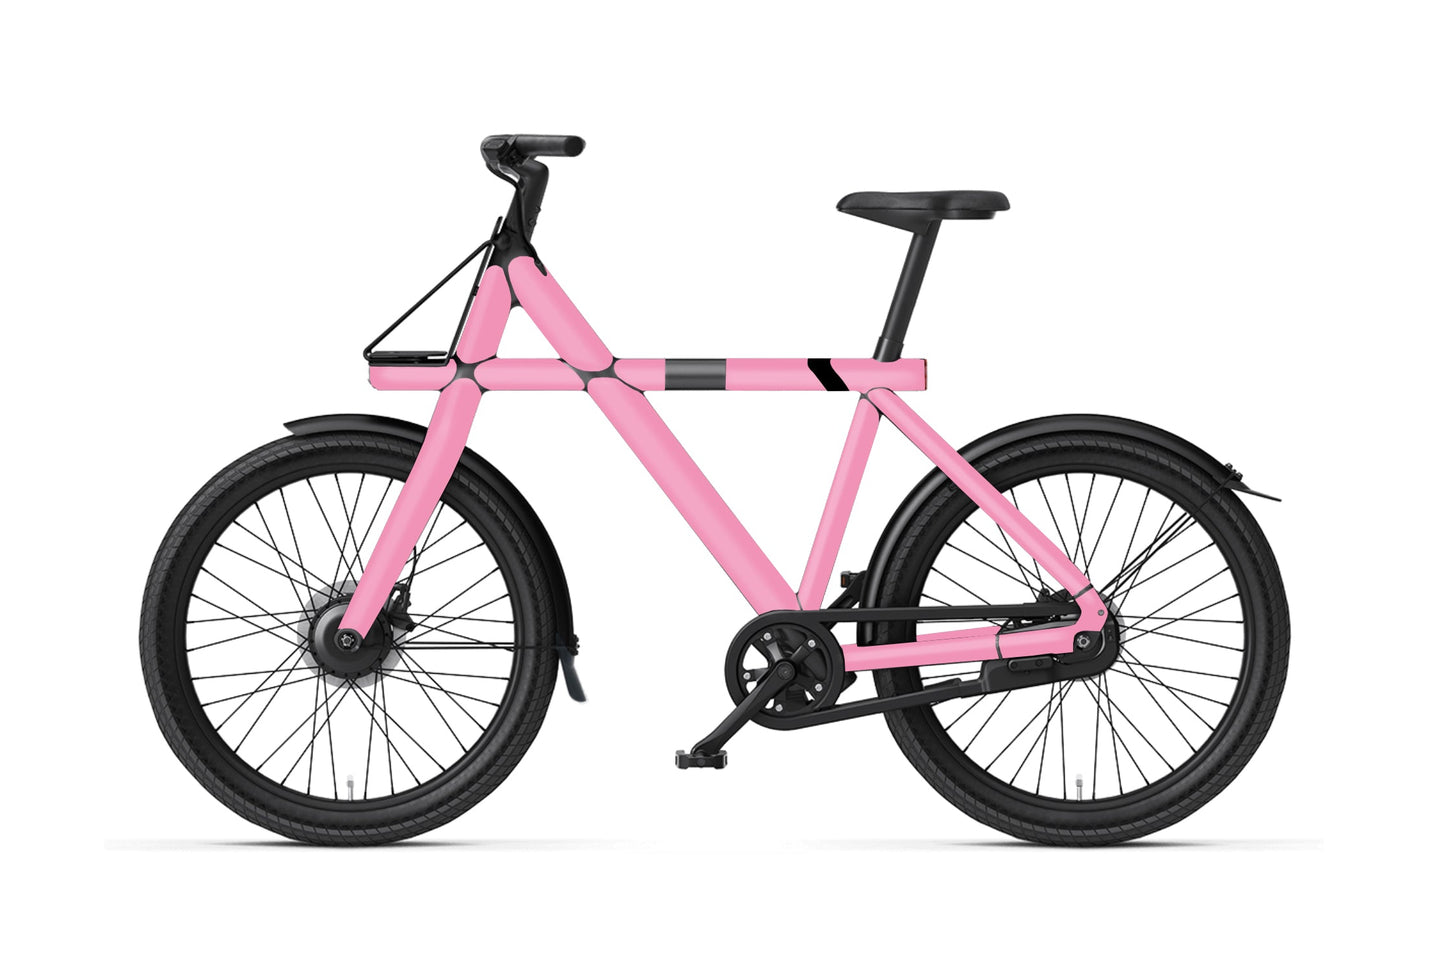 PINK PROTECT KIT FOR VANMOOF X2